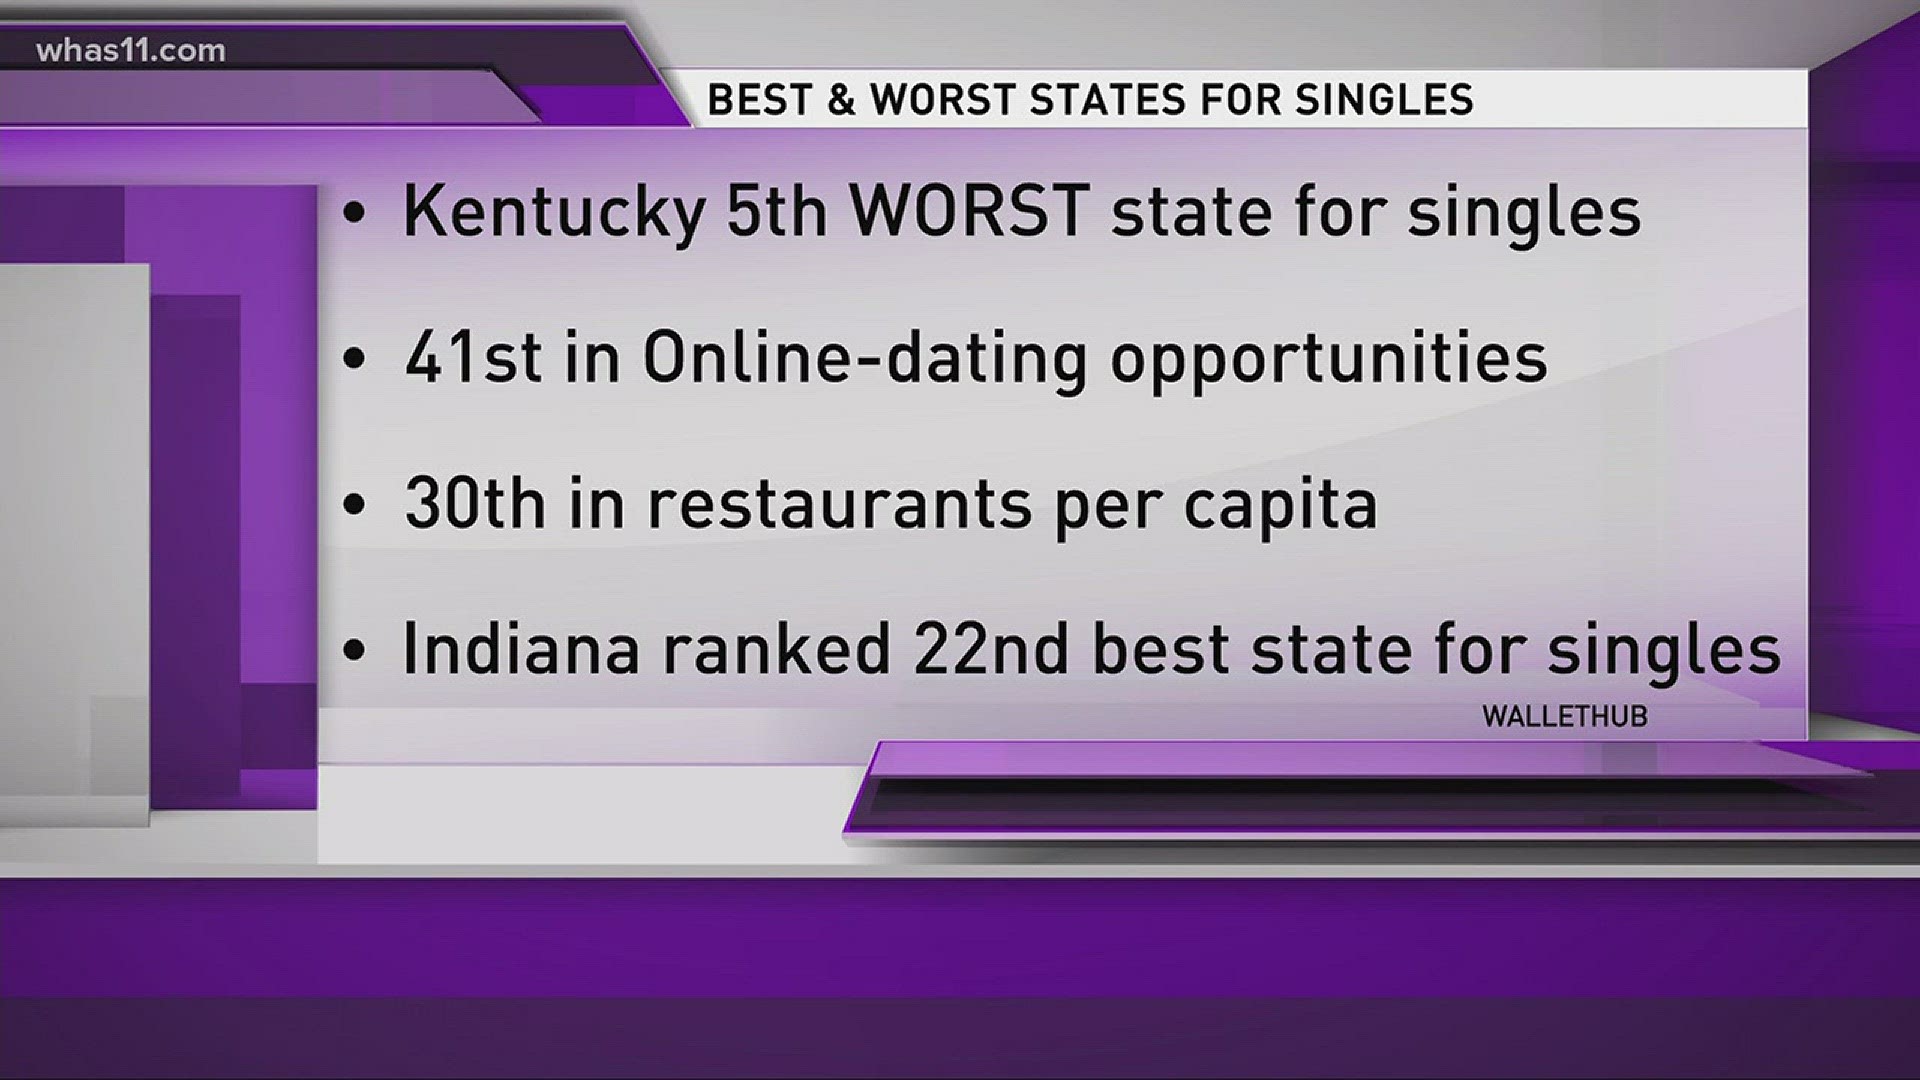 The Bluegrass state isn't too hot when it comes to being a destination for single people. Indiana faired a little better.